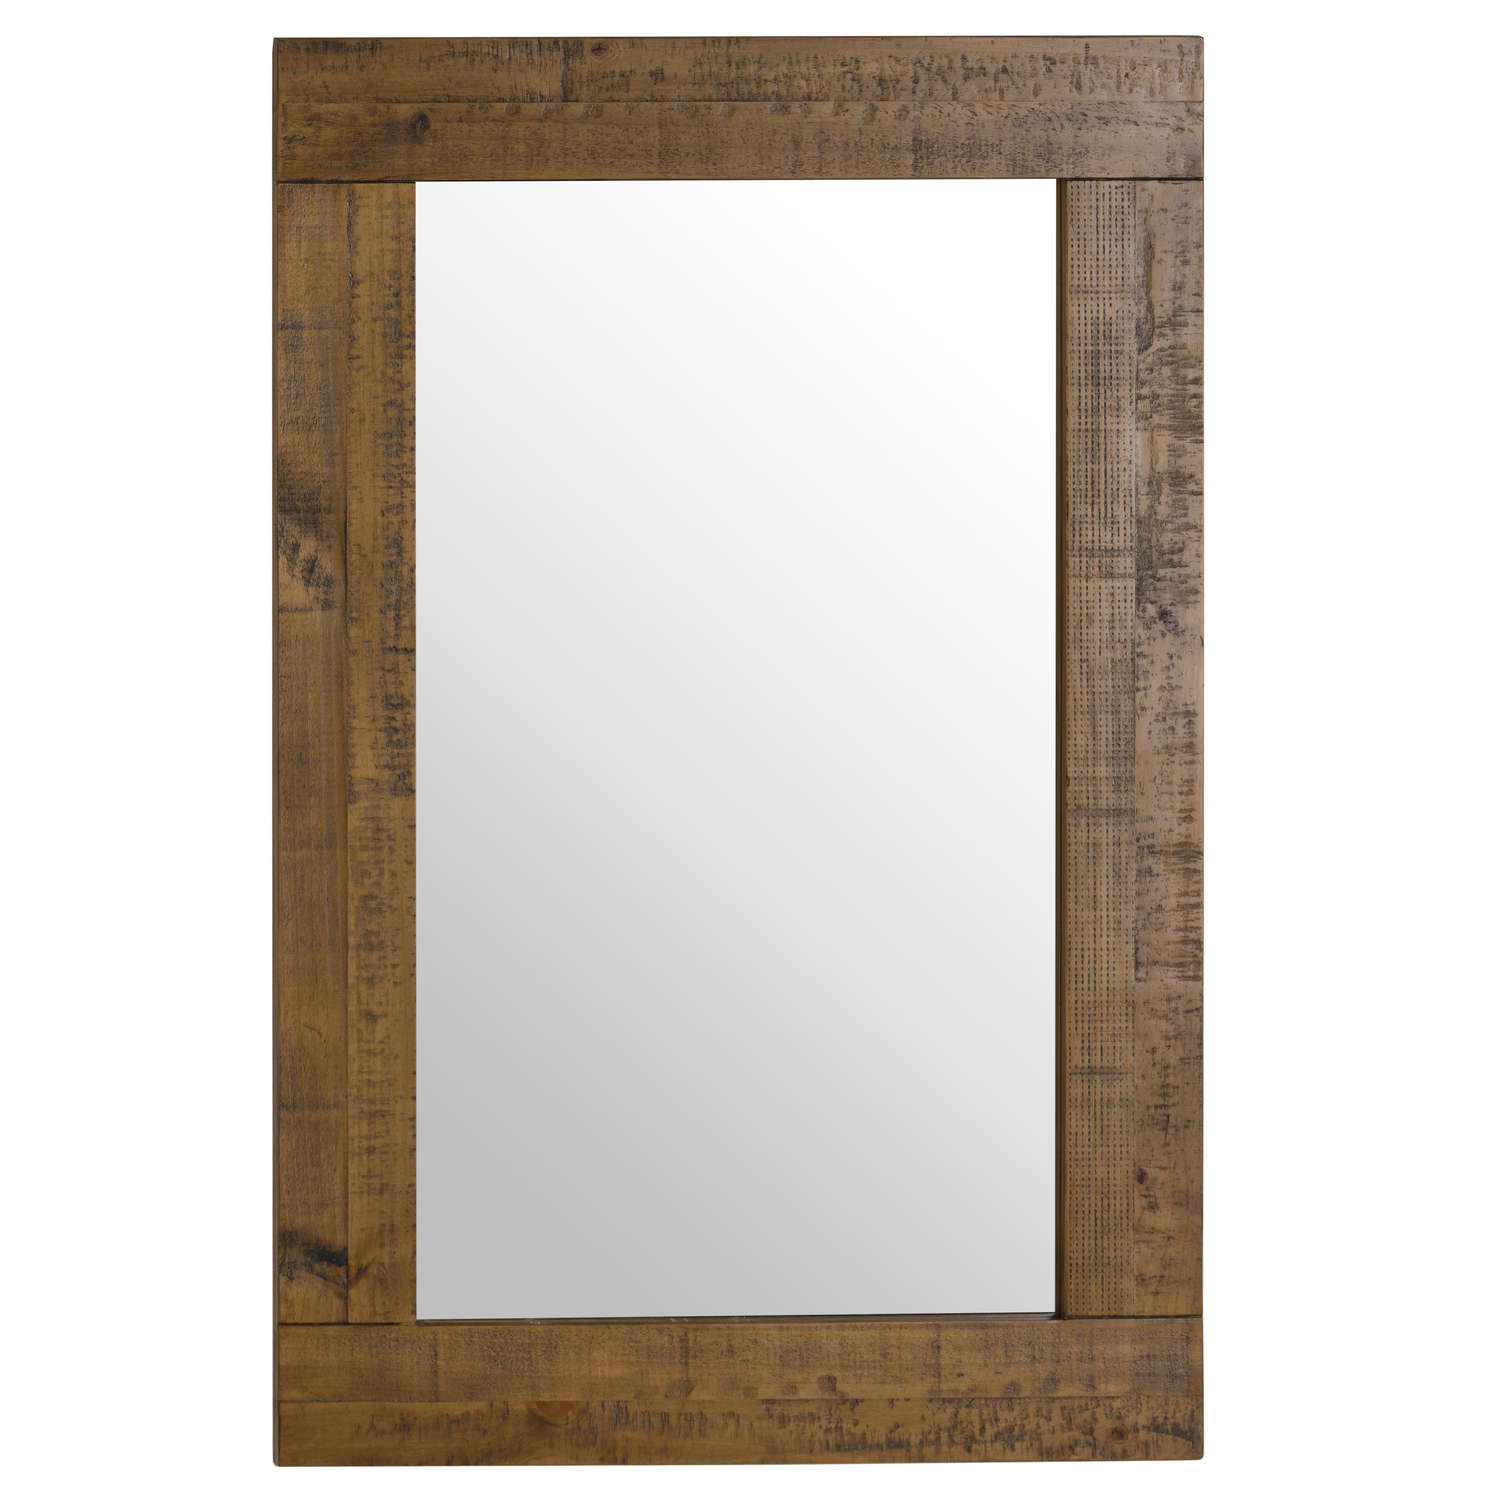 The Deanery Collection Plank Mirror